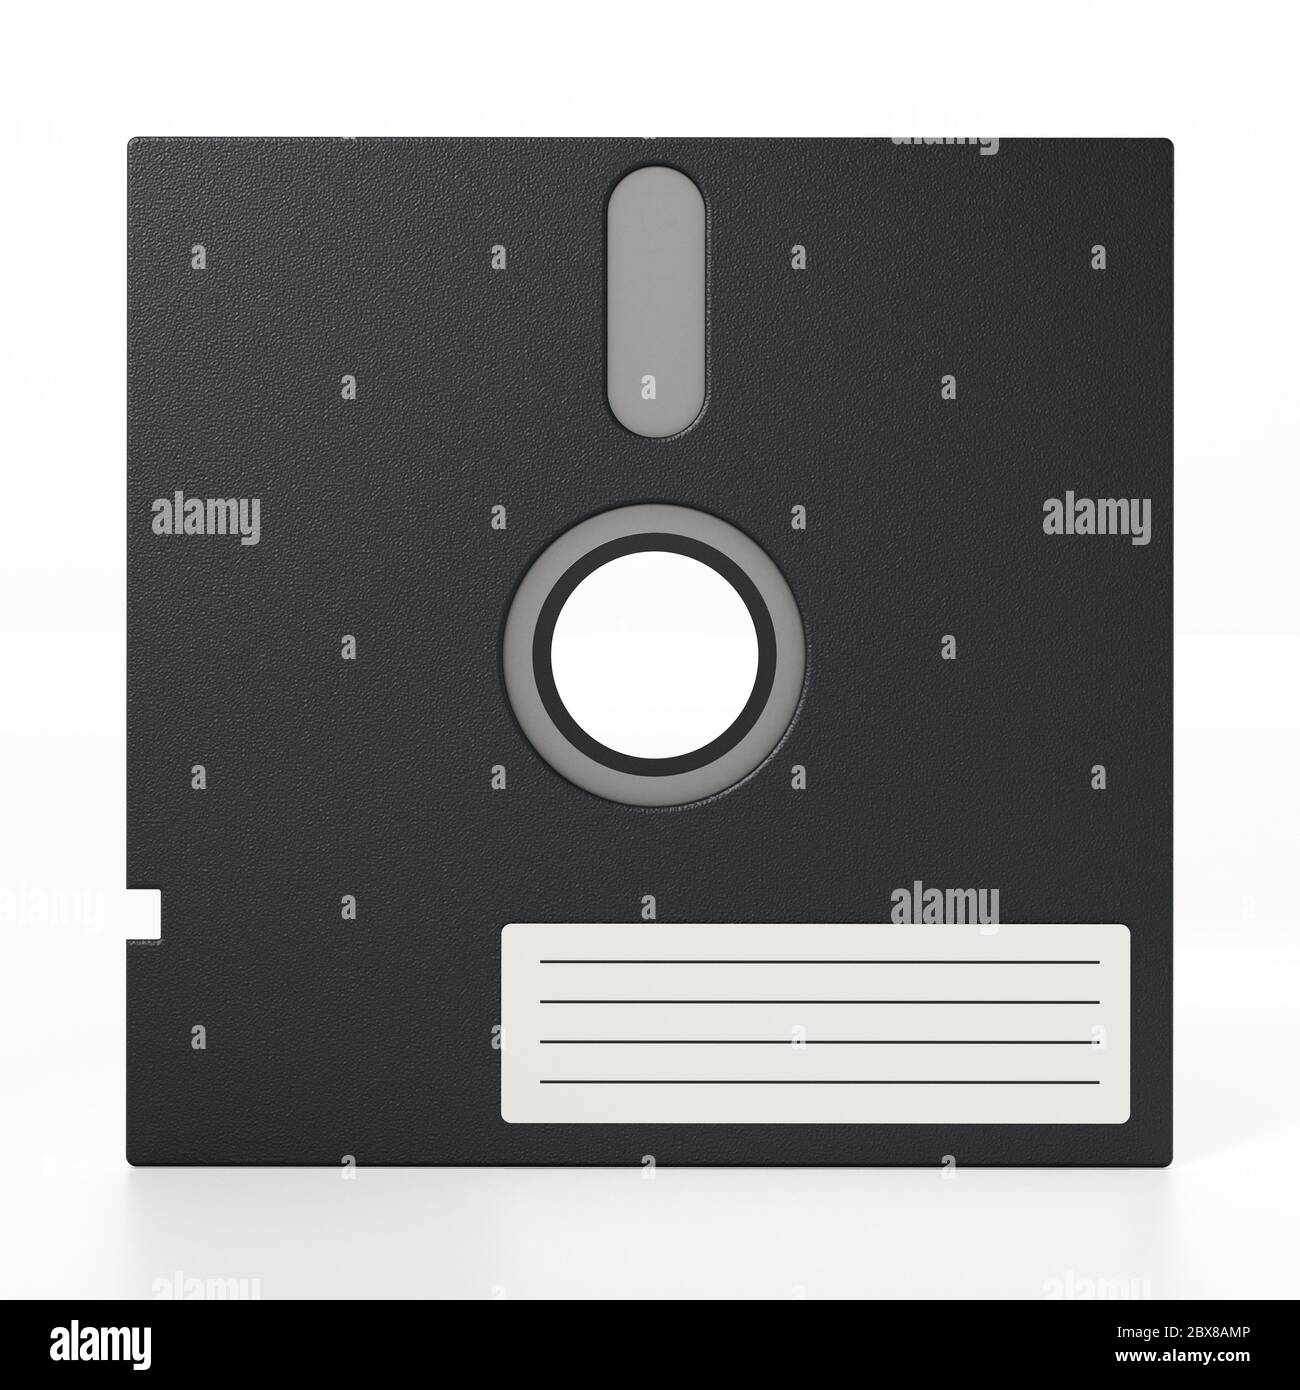 5.25 inch floppy disk isolated on white background. 3D illustration. Stock Photo